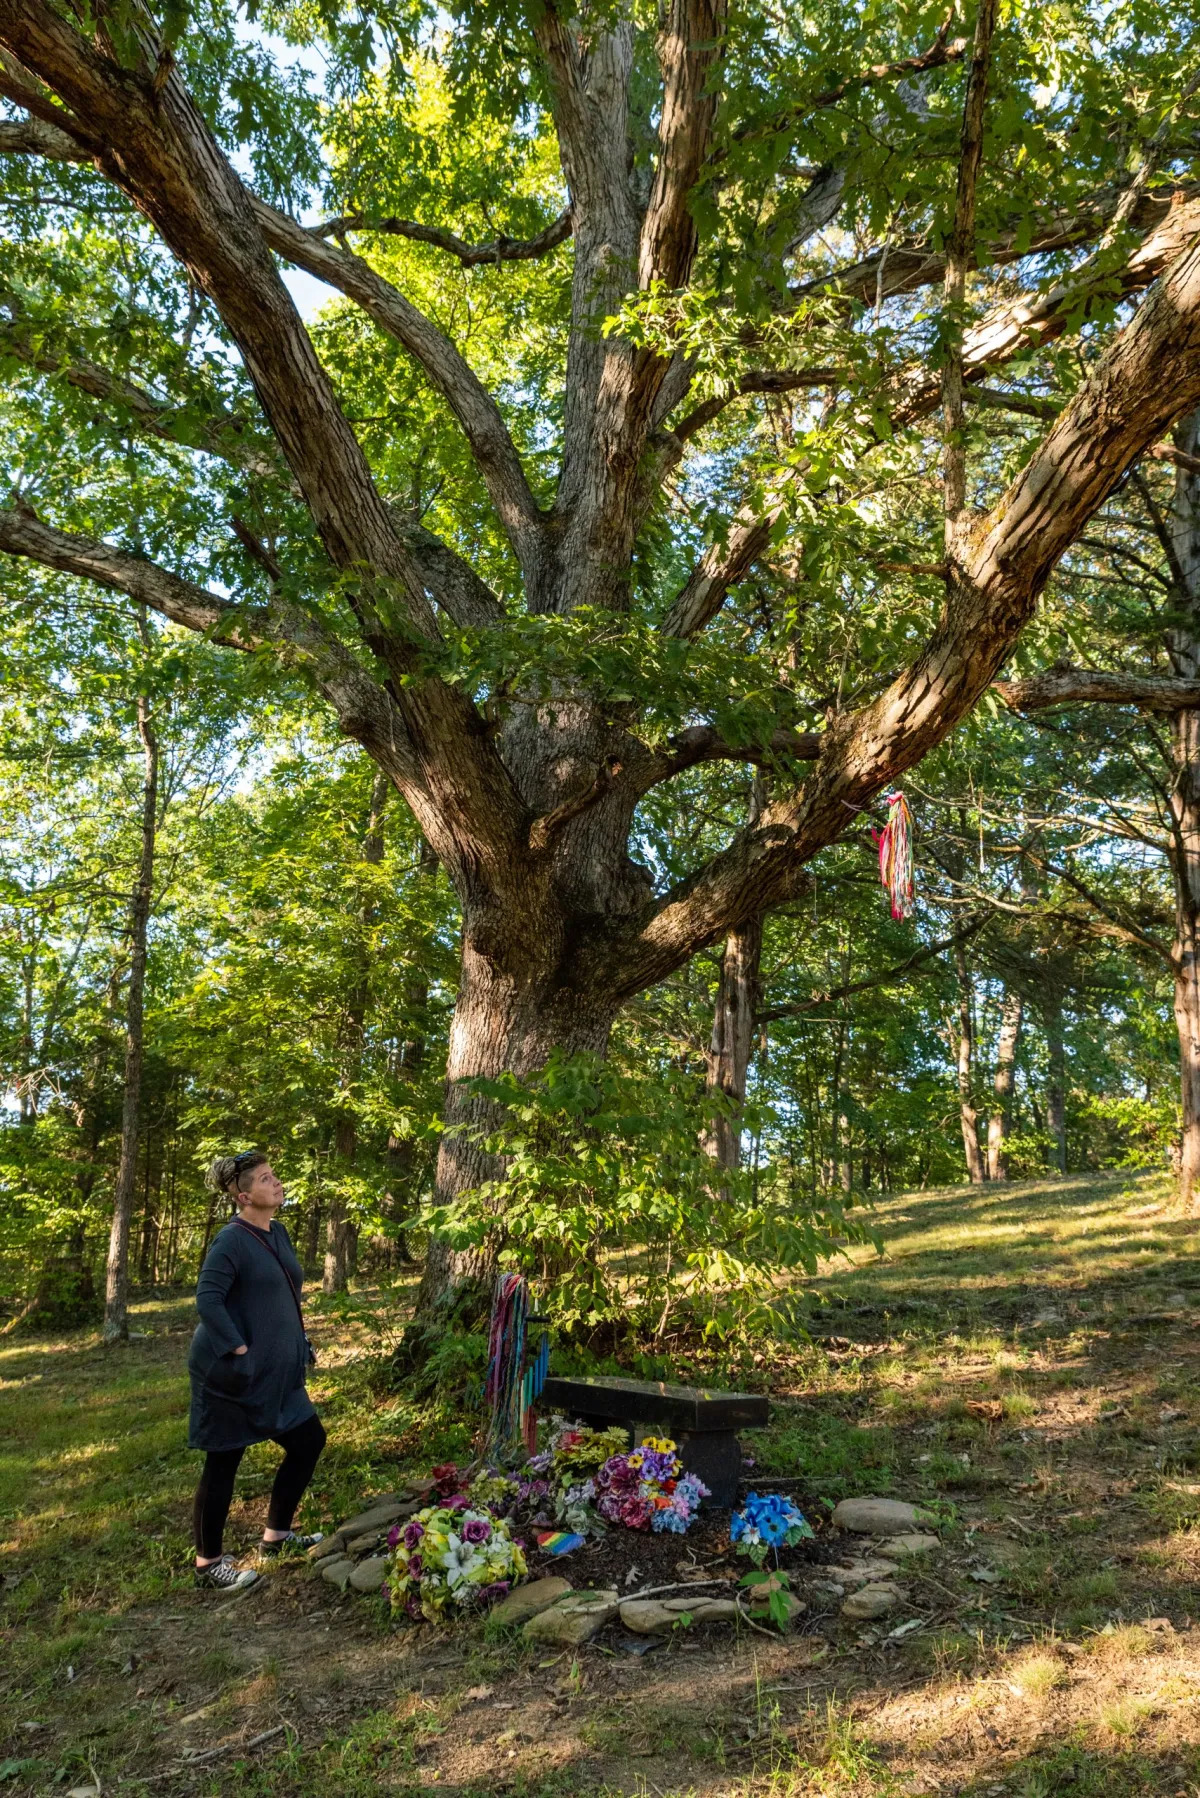 LGBTQ+ Clubs Kentucky: Woman standing next to planted flower bed and bench at memorial site on a hillside under a huge tree.